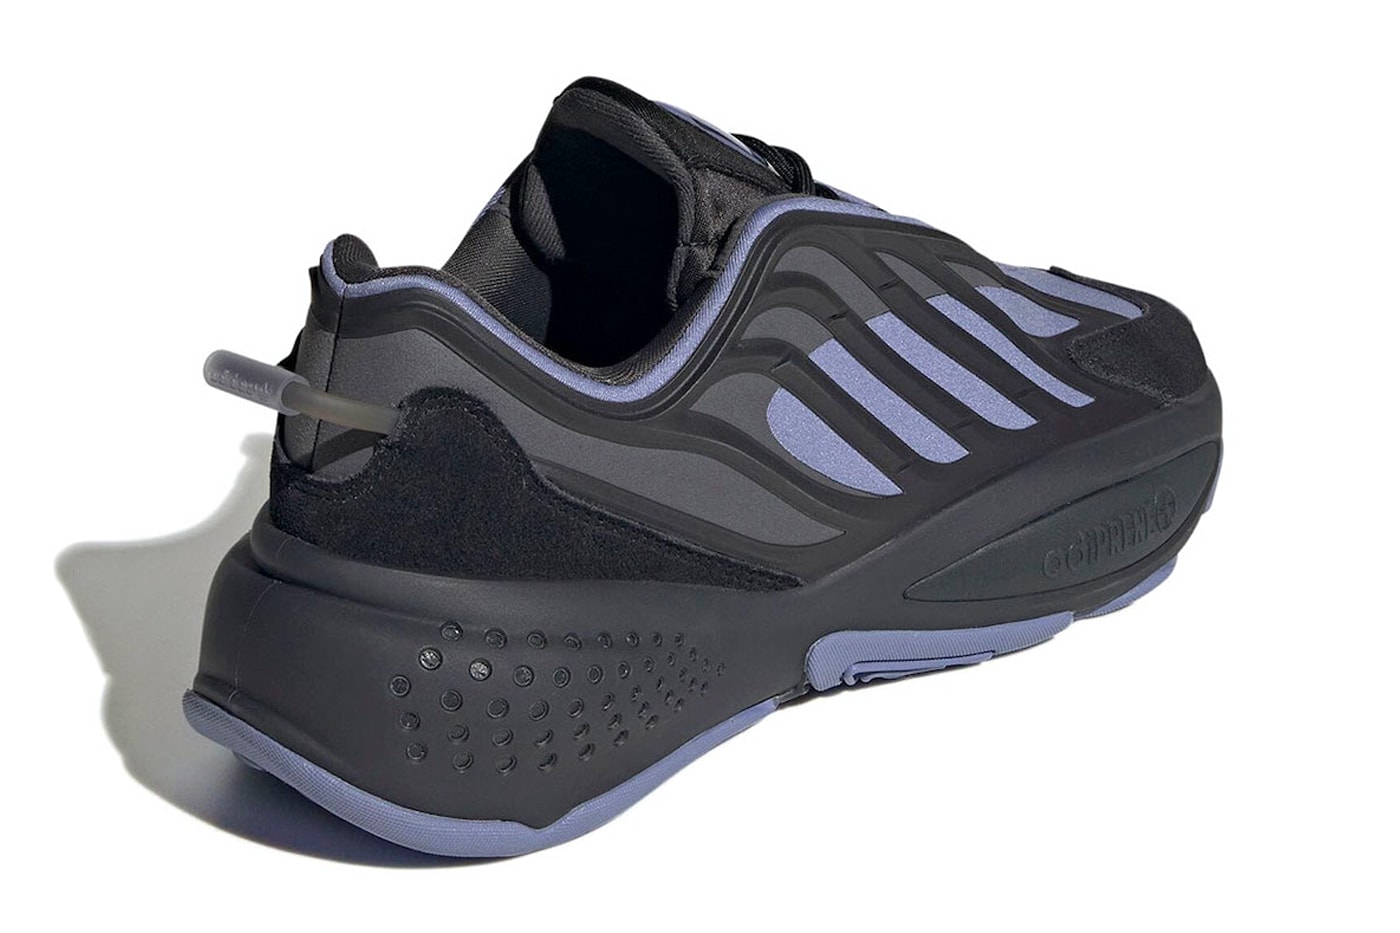 adidas Ozrah “Carbon” H04206 Release Info sneakers three stripes footwear carbon core black textile suede